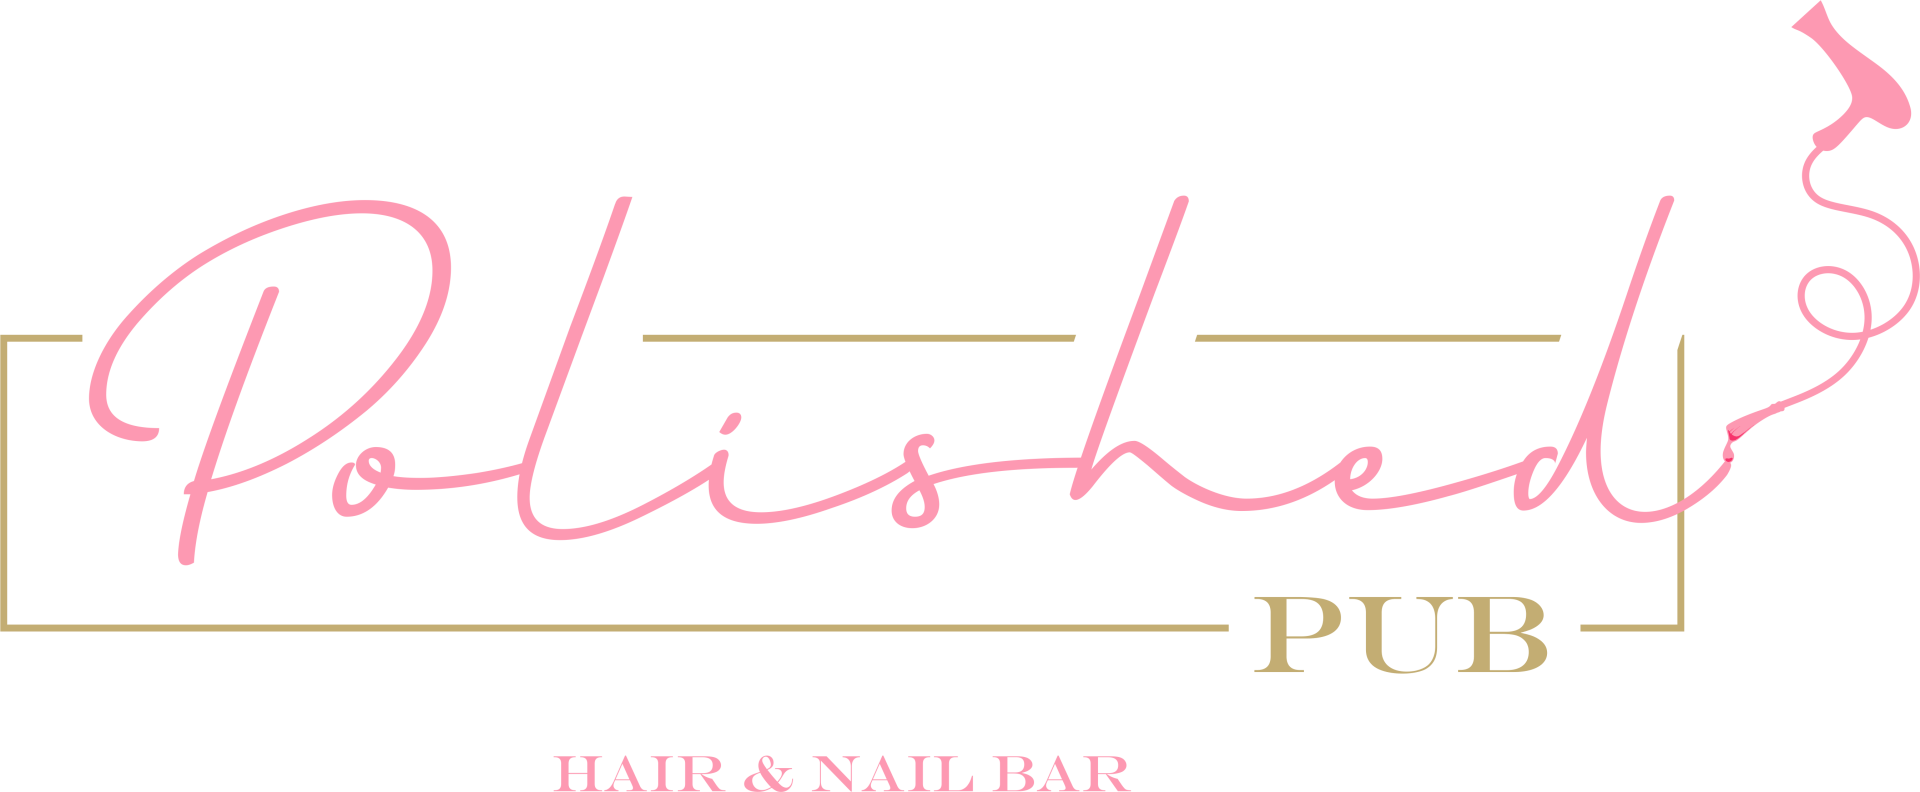 A pink and gold logo for a hair and nail bar.